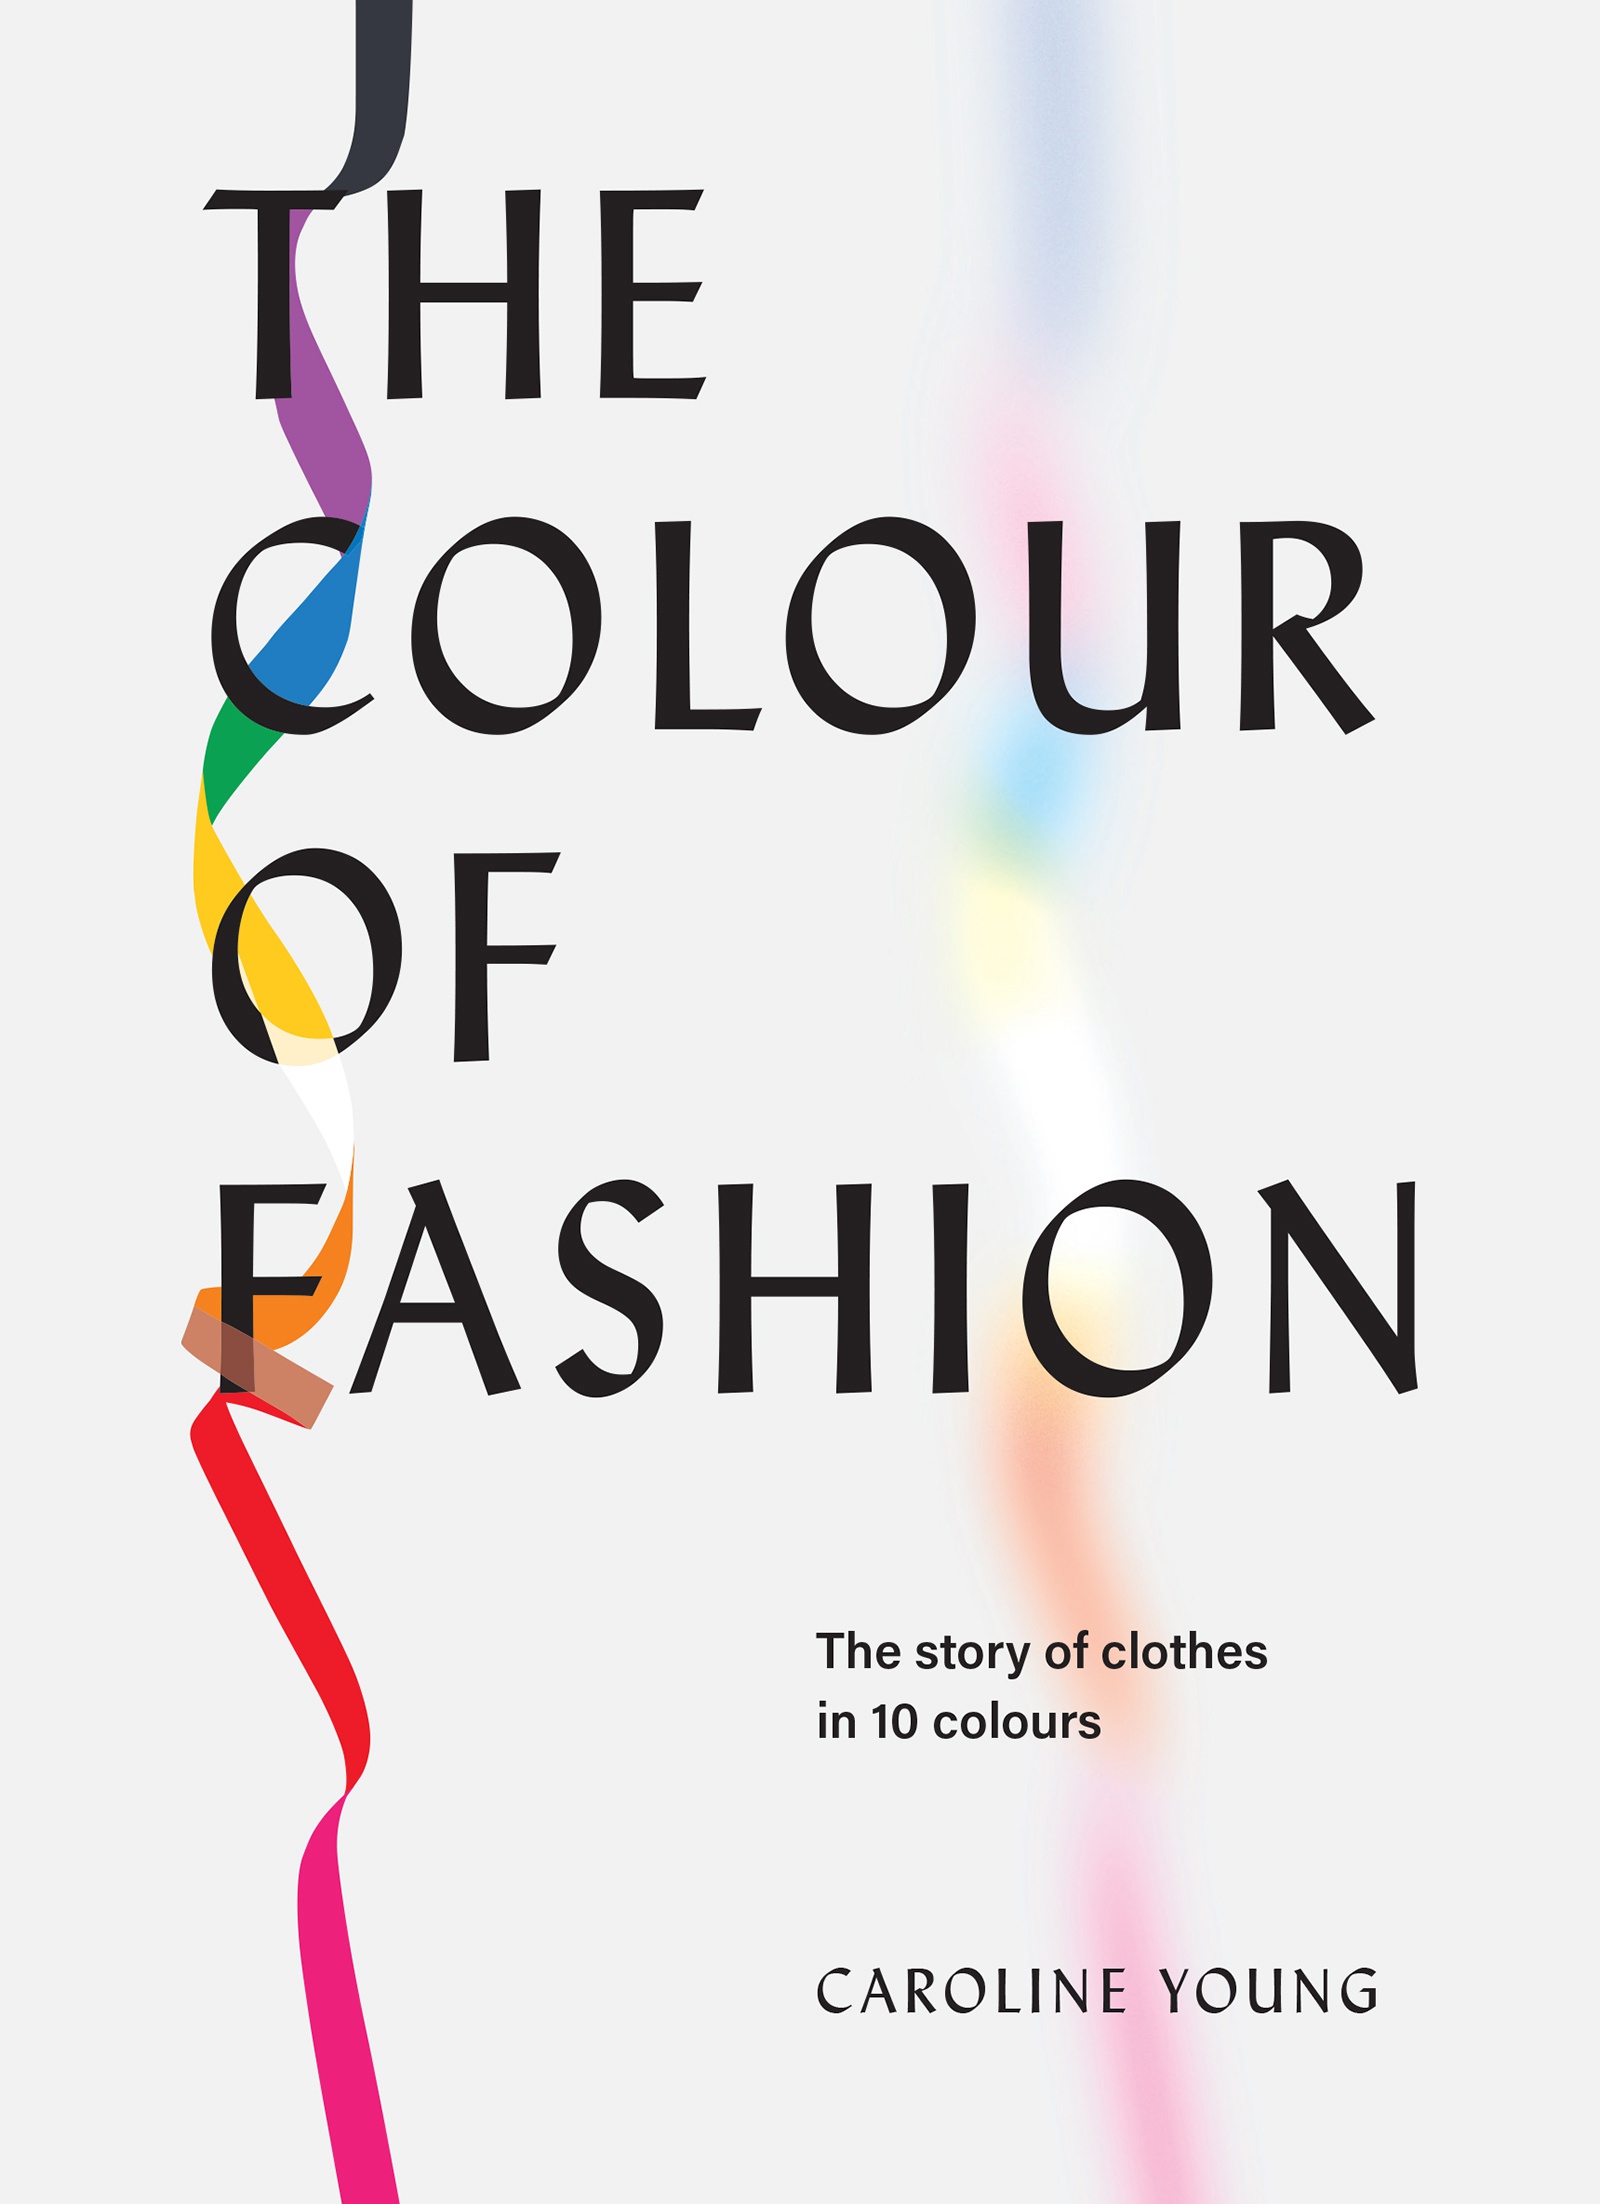 THE COLOUR OF FASHION : THE STORY OF CLOTHES IN TEN COLORS HC